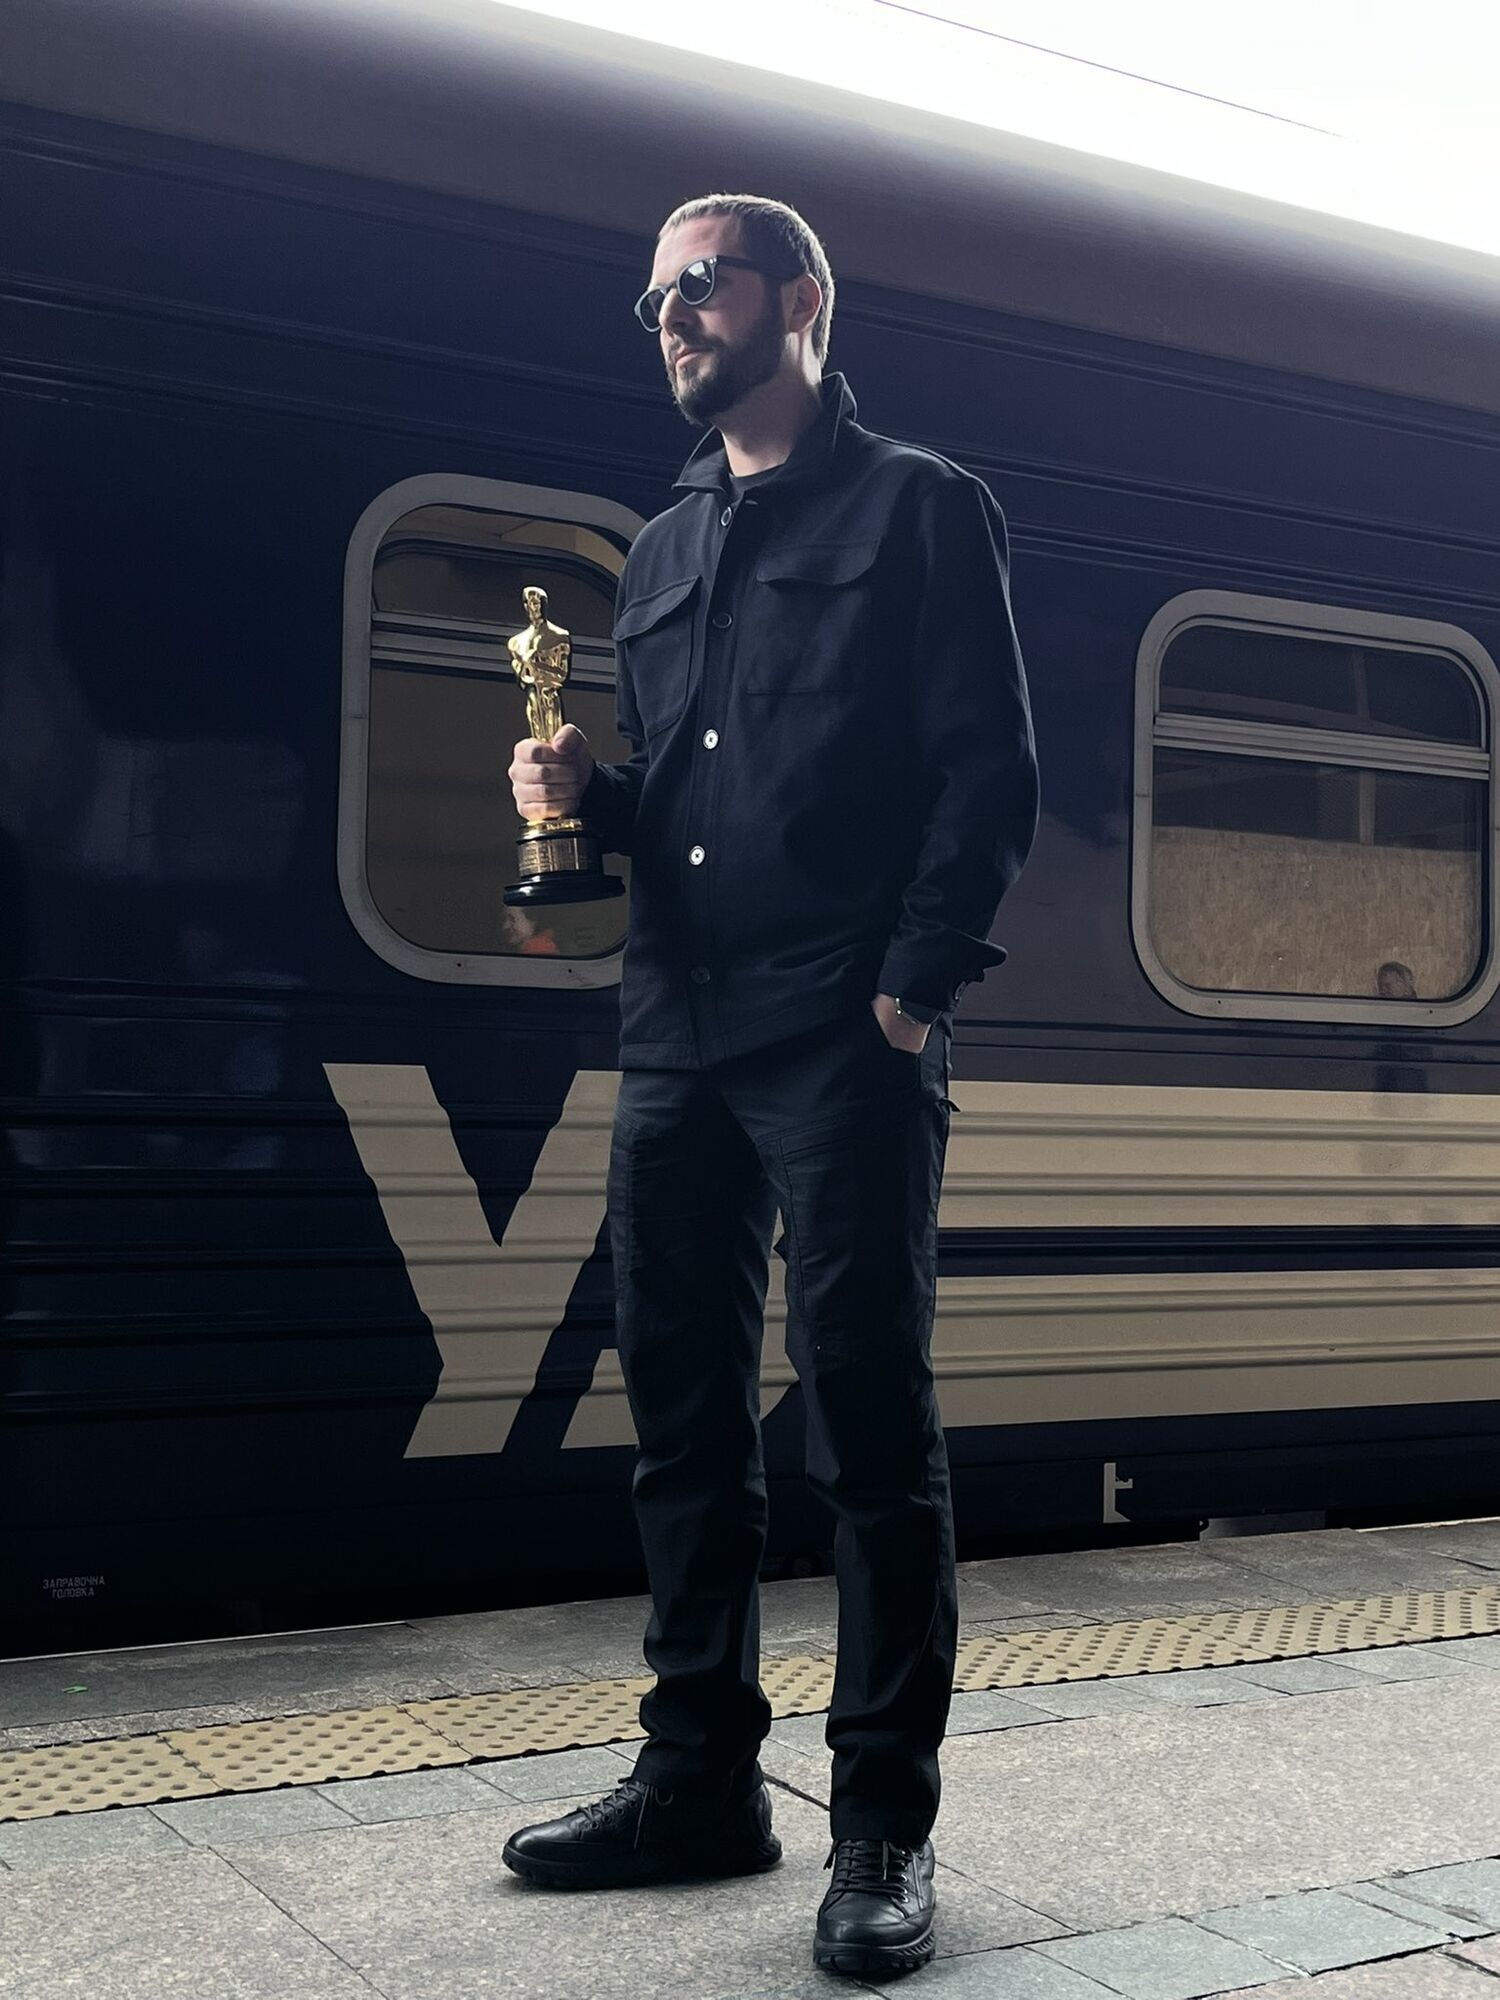 The director of ''20 Days in Mariupol'', Mstyslav Chernov, who was applauded by Hollywood, brought the first Oscar to Ukraine. Photo